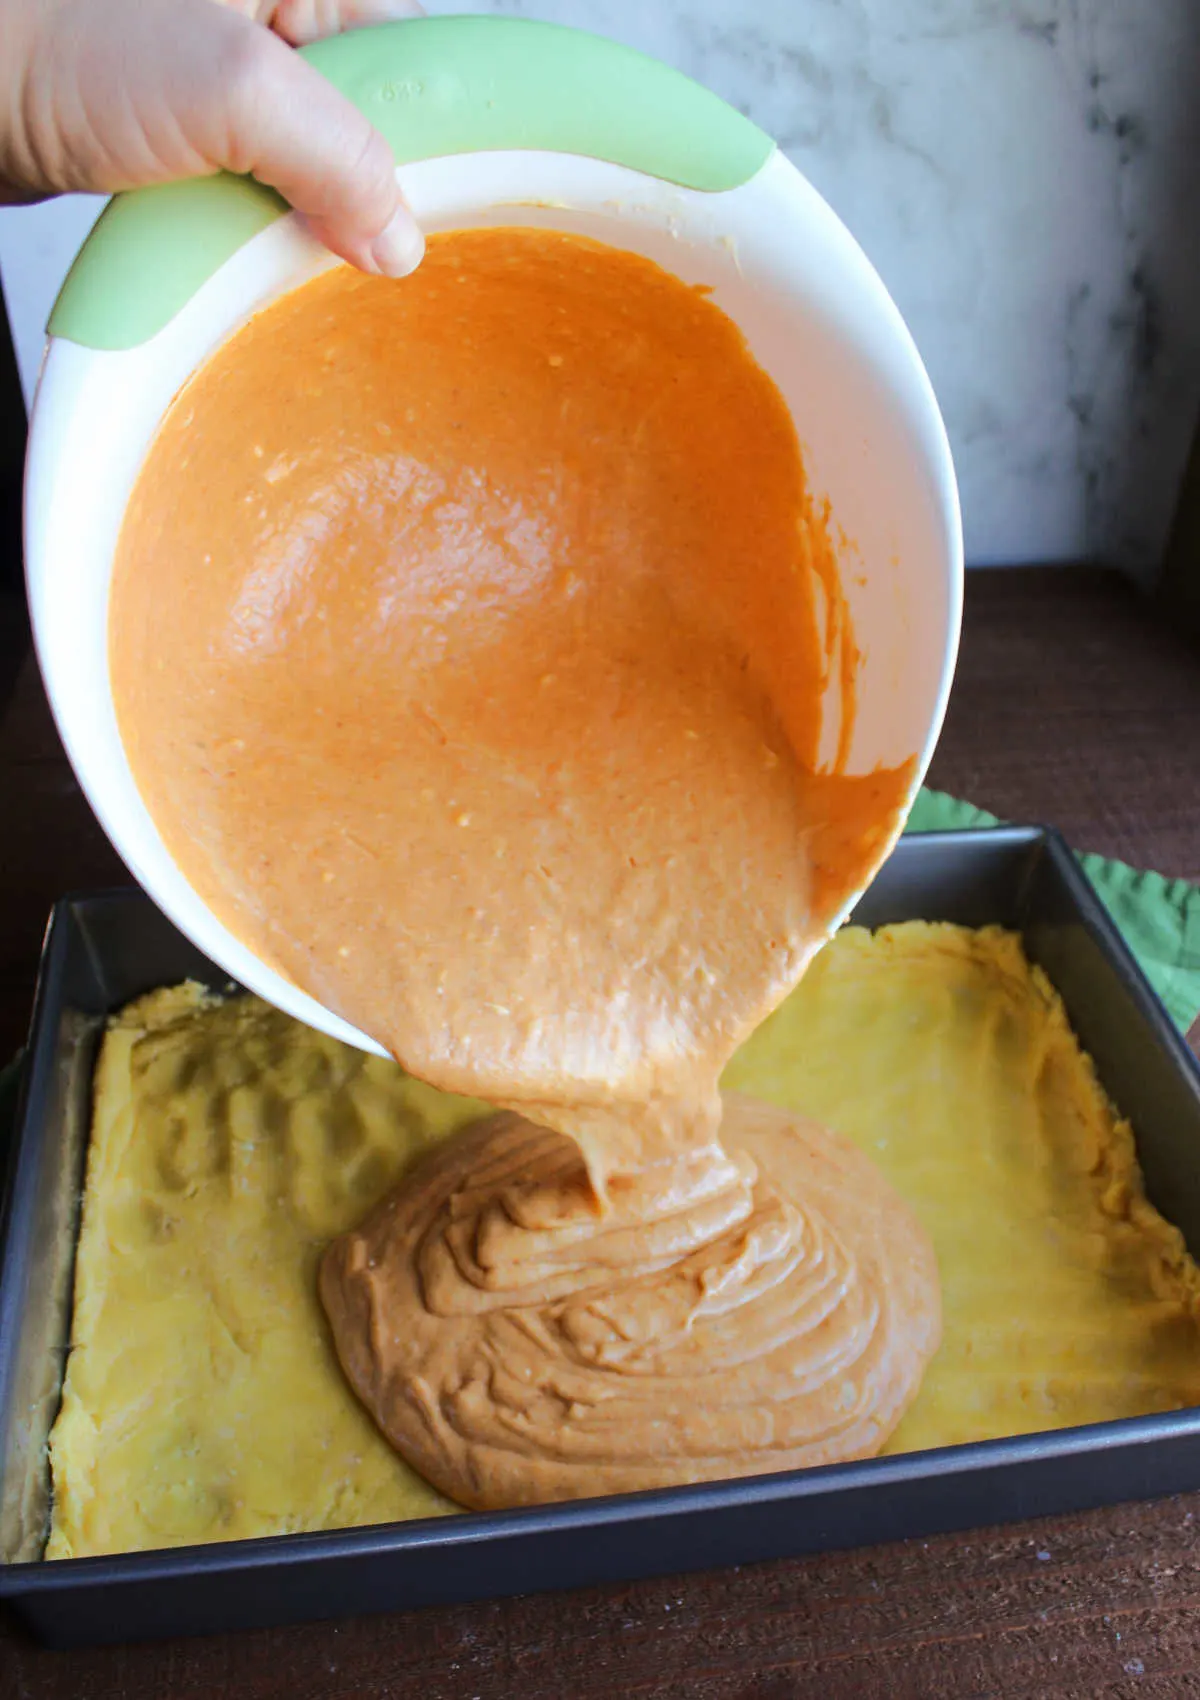 Pouring mixing bowl of pumpkin cream cheese mixture over cake mix crust in pan.